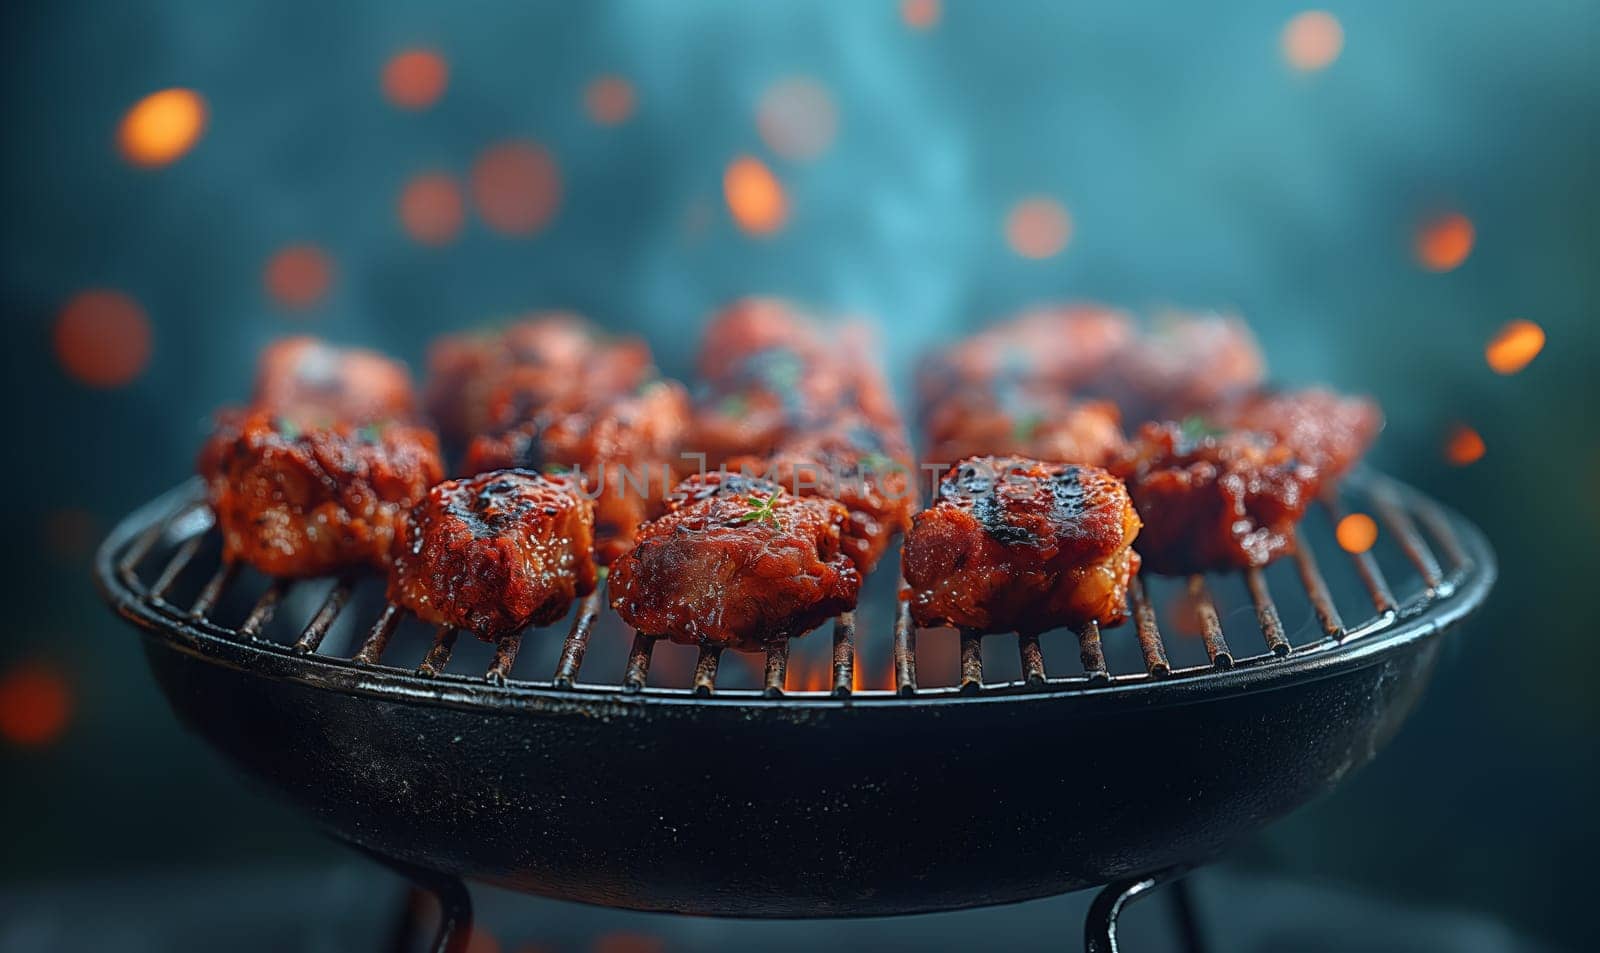 Pieces of meat cooked on the grill. Selective focus